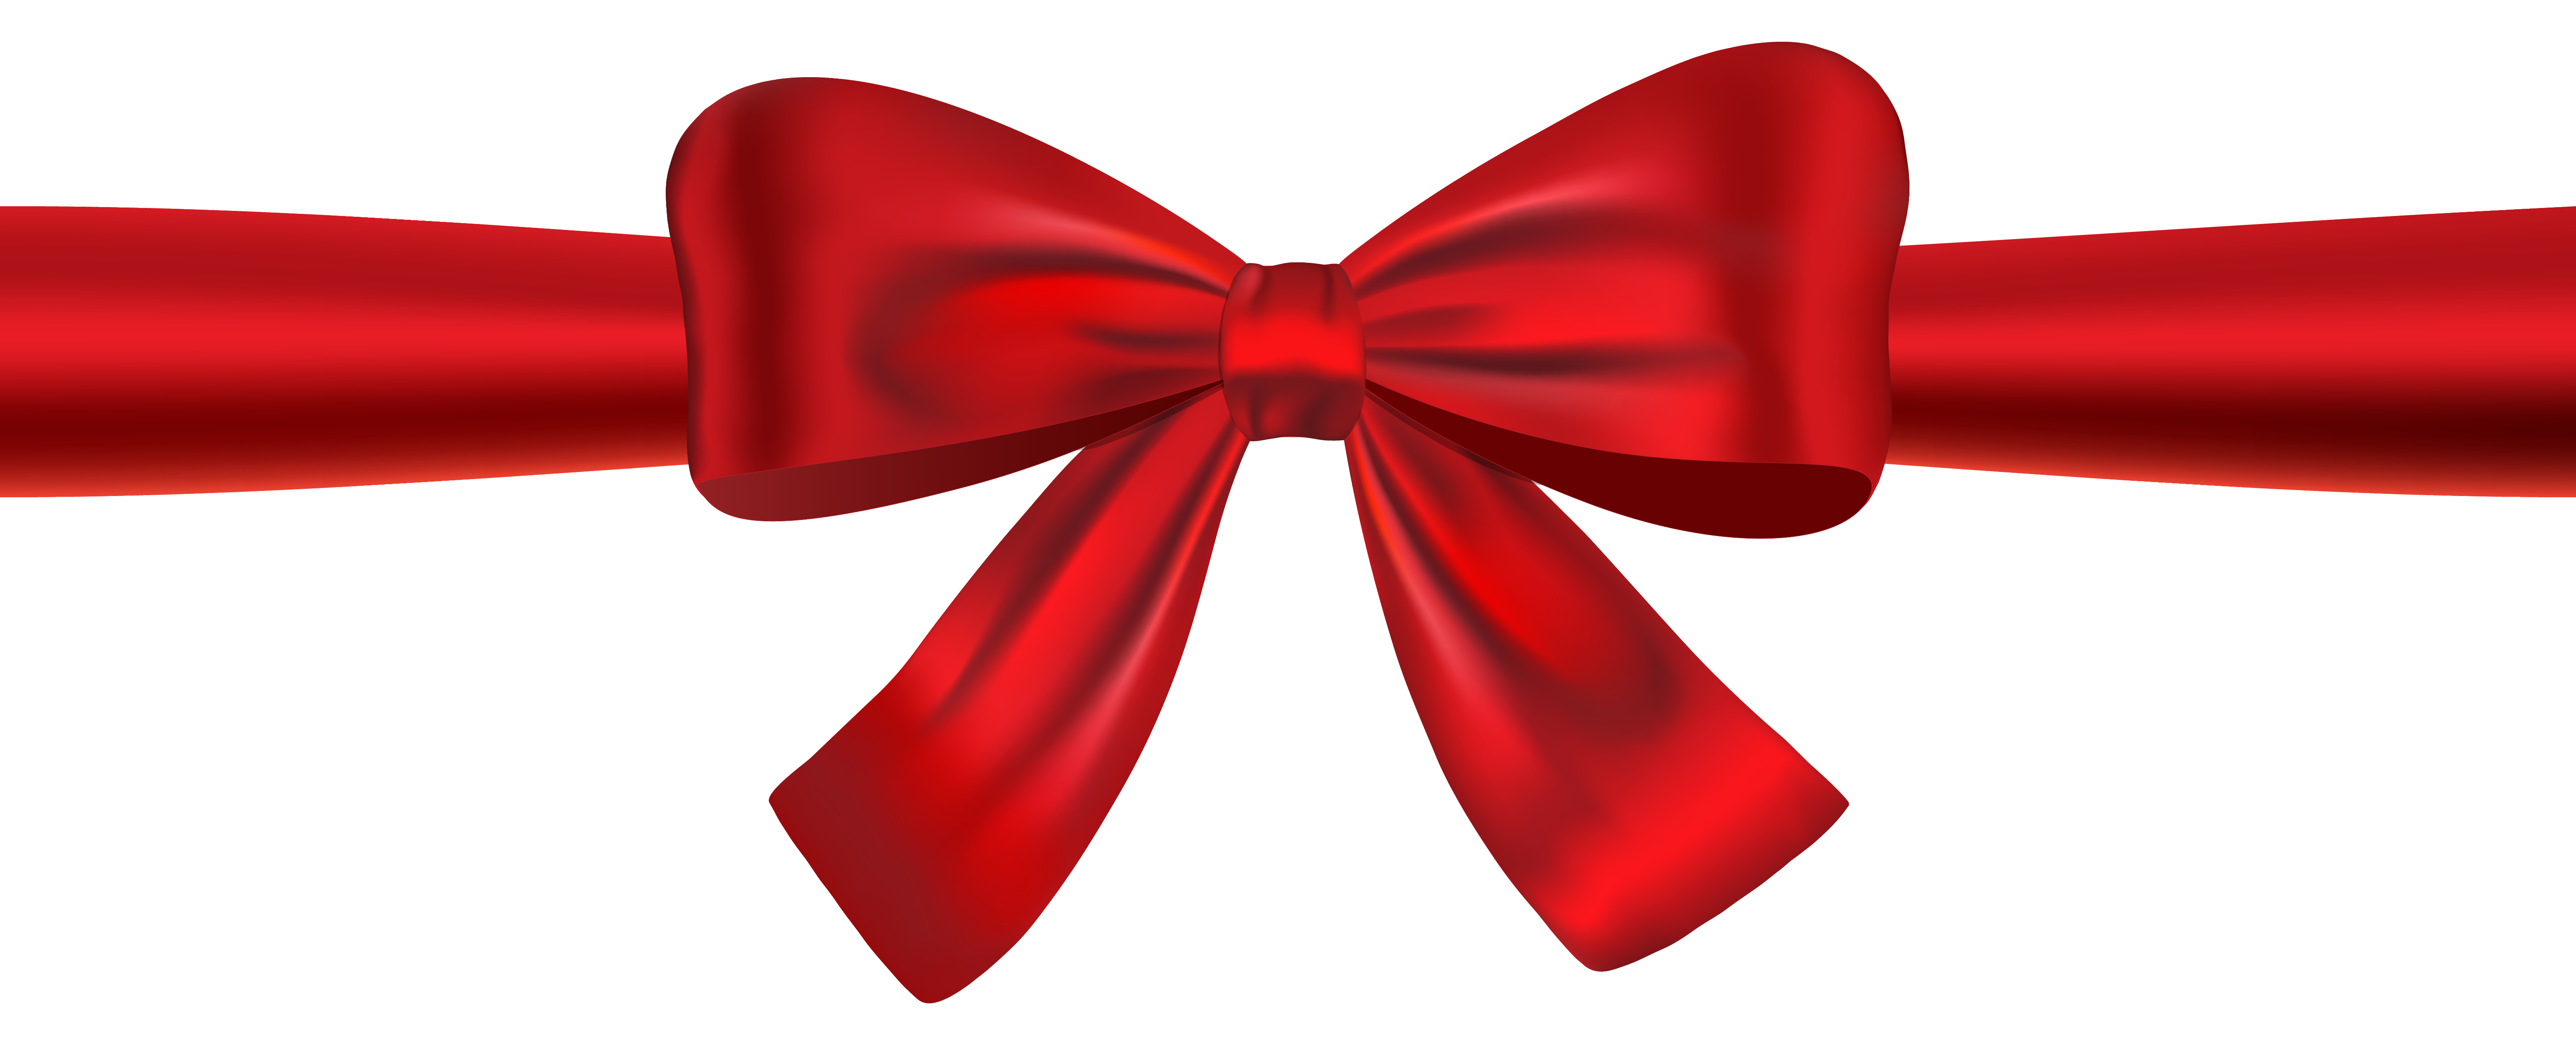 ... Red Ribbon Clipart - clip